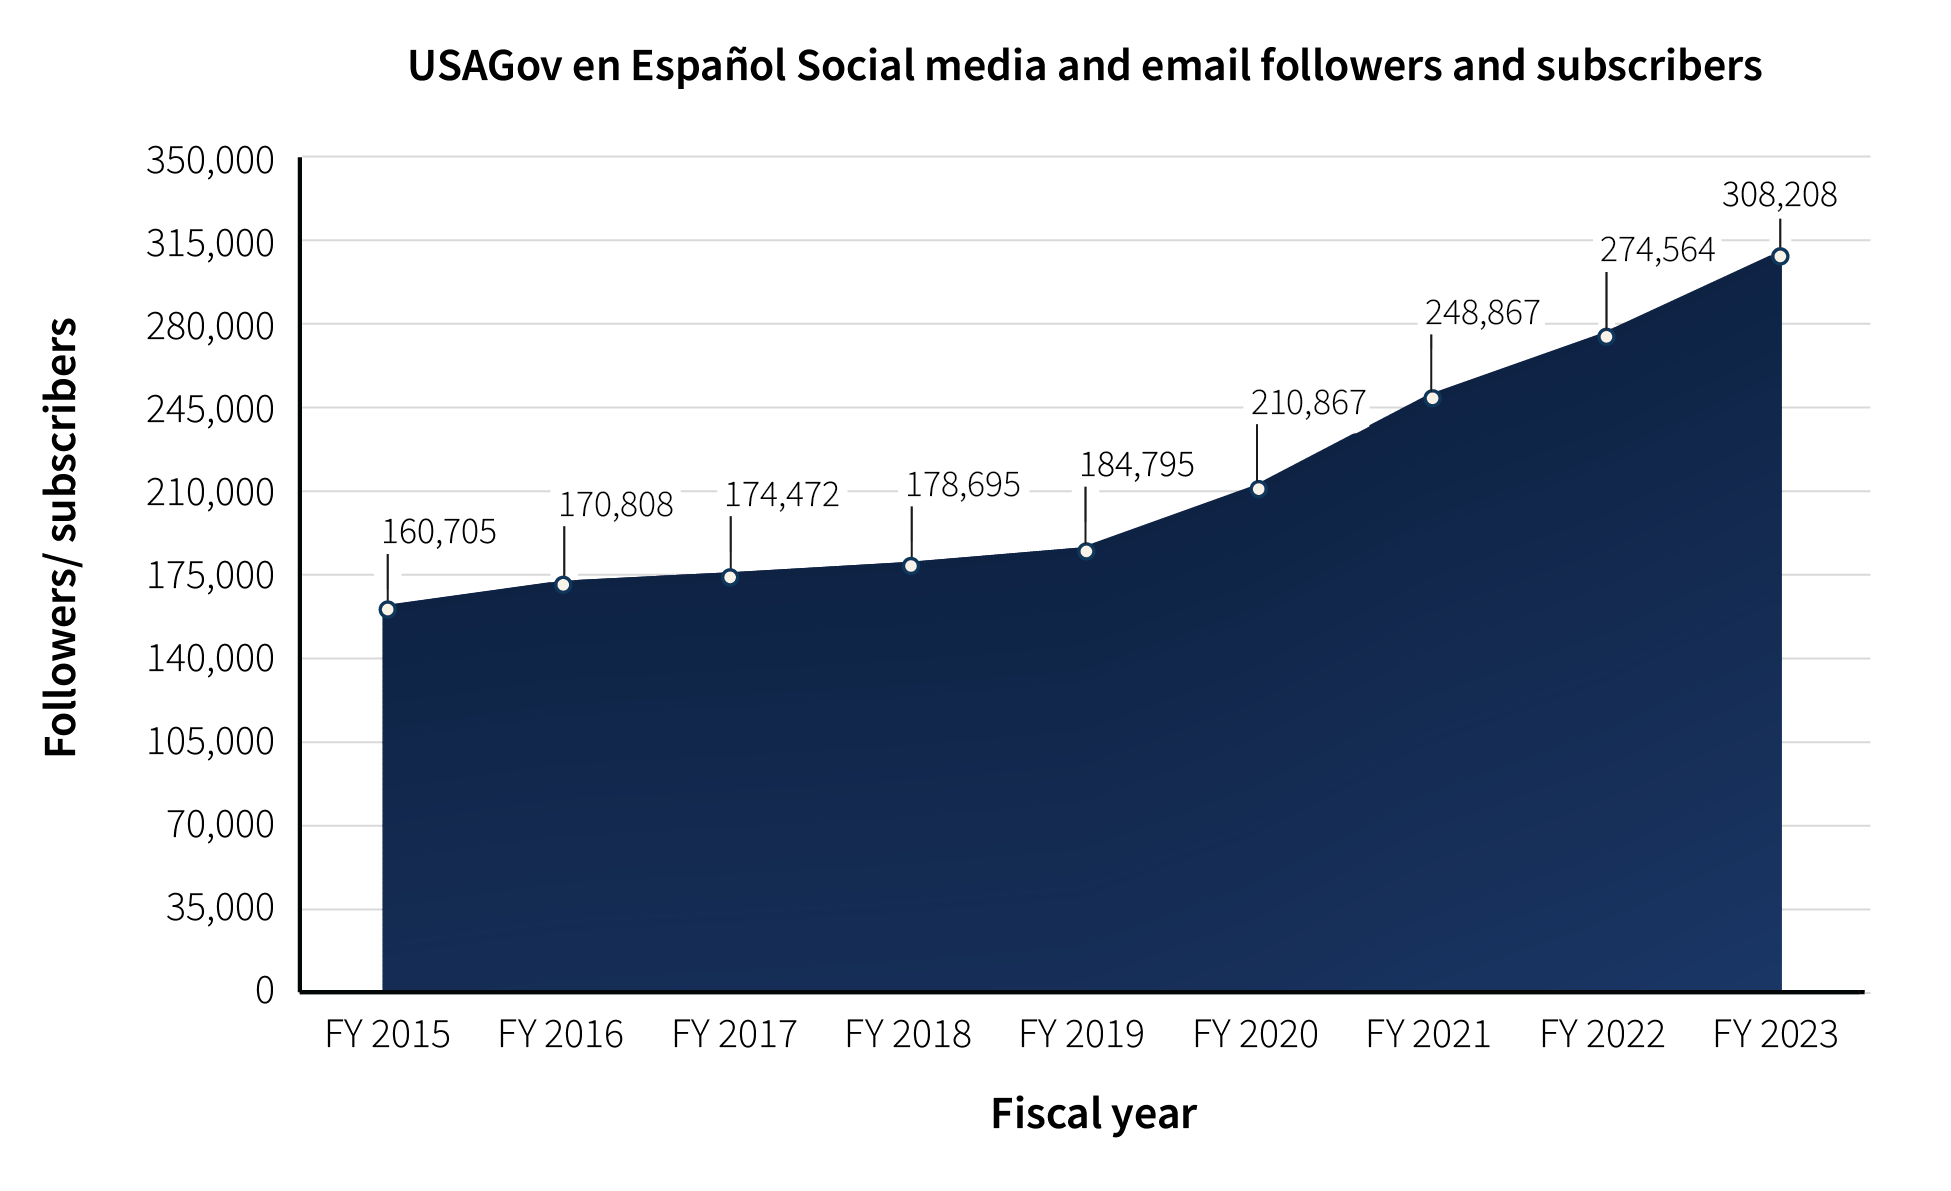 Line graph showing total follower and subscriber growth to USAGov en Español social media and email channels organized by fiscal year since FY2015. This includes email subscribers and followers on @USAGovEspanol Facebook, Twitter, and YouTube platforms.